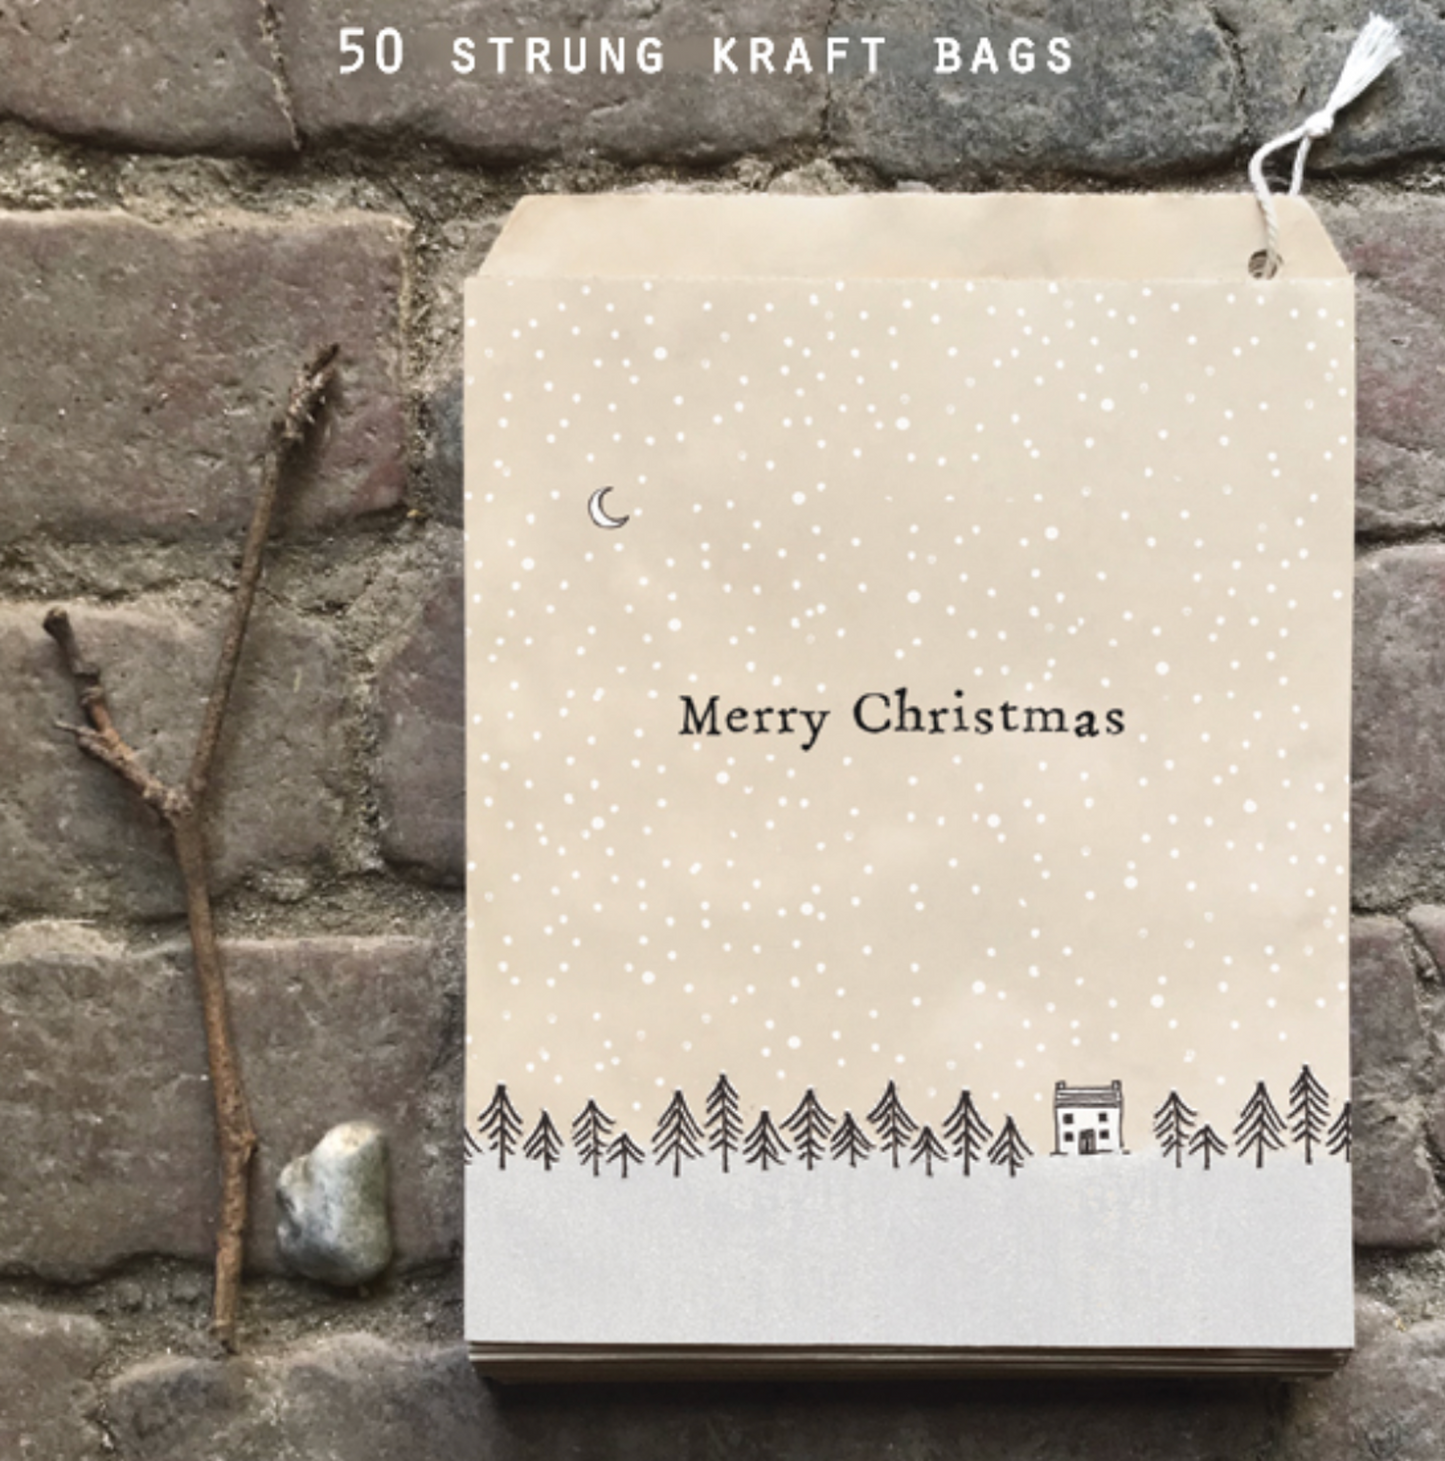 Merry Christmas Paper Bags